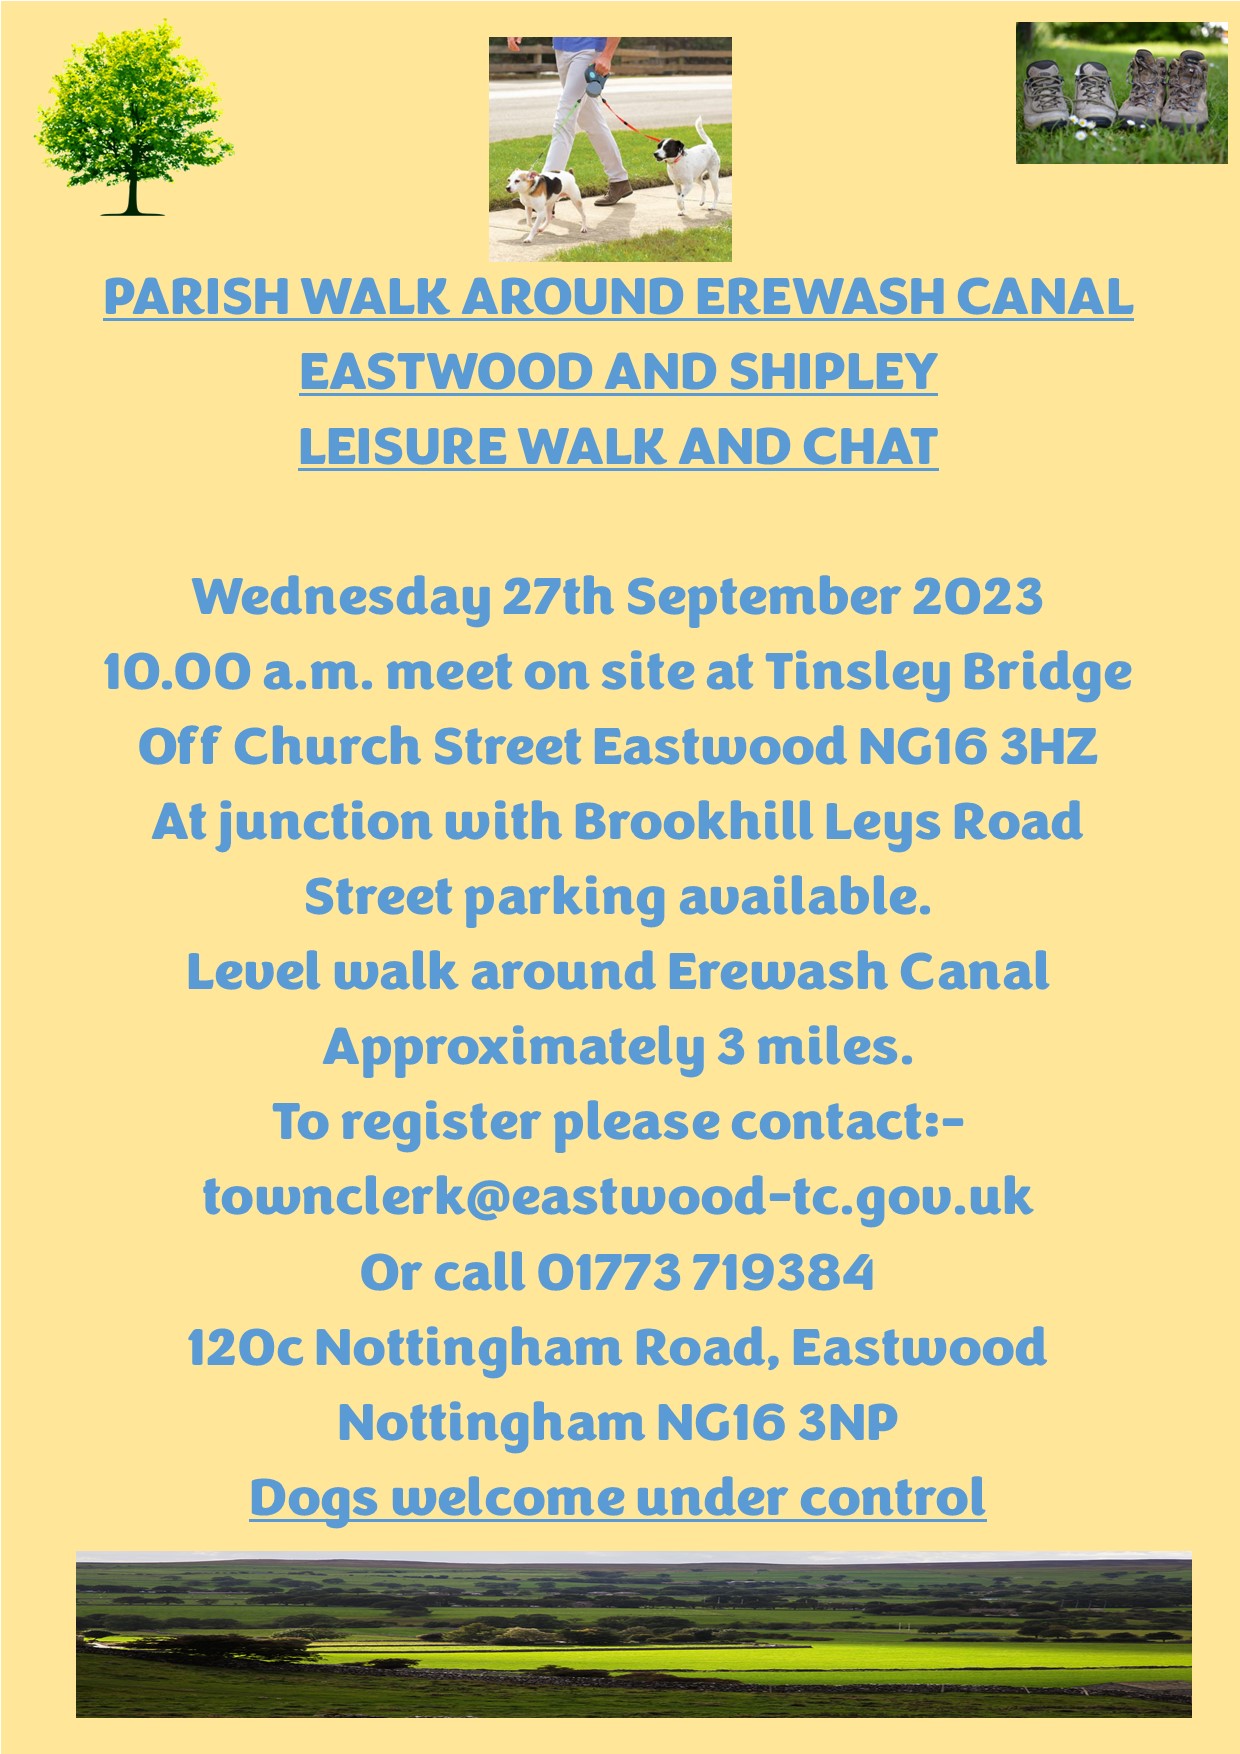 Parish Walk Eastwood Canals Wednesday 27th September 2023 at 10.00 a.m. event.